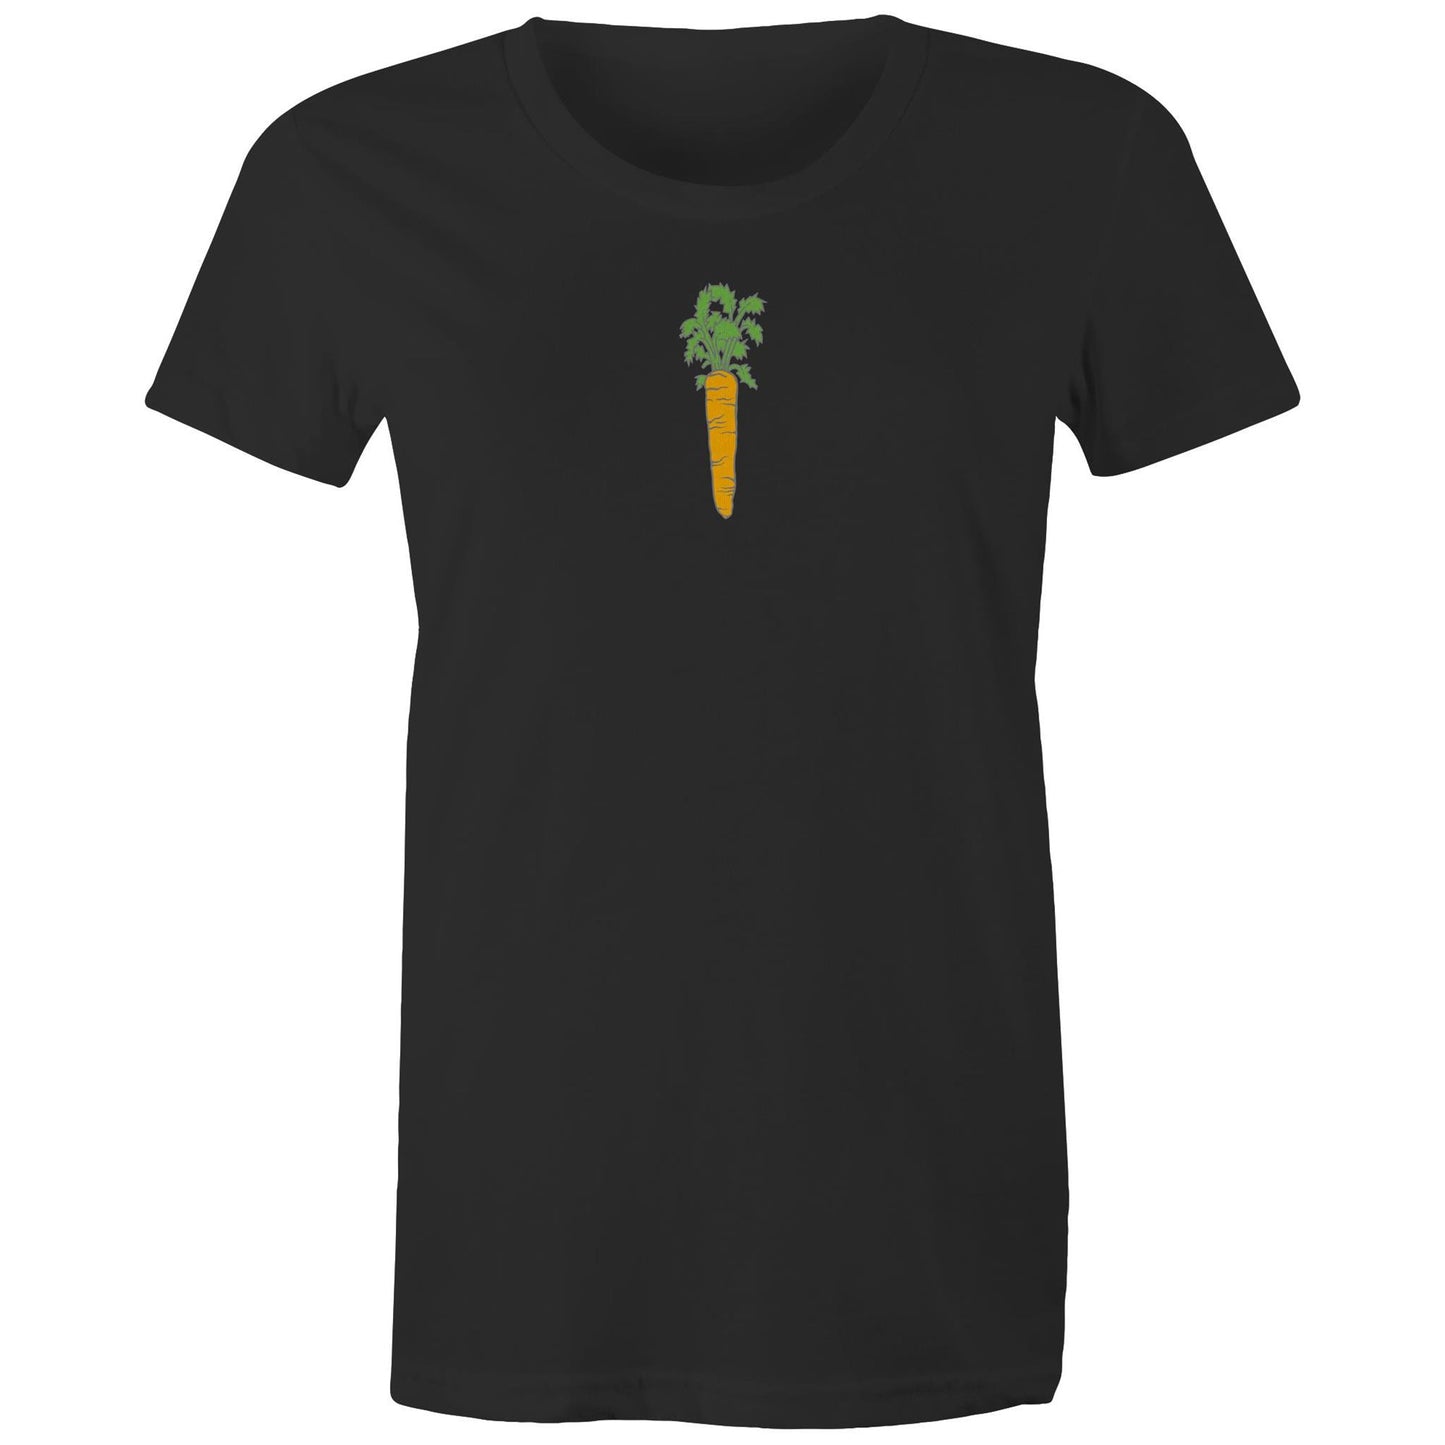 Carrot and Bunny T Shirts for Women